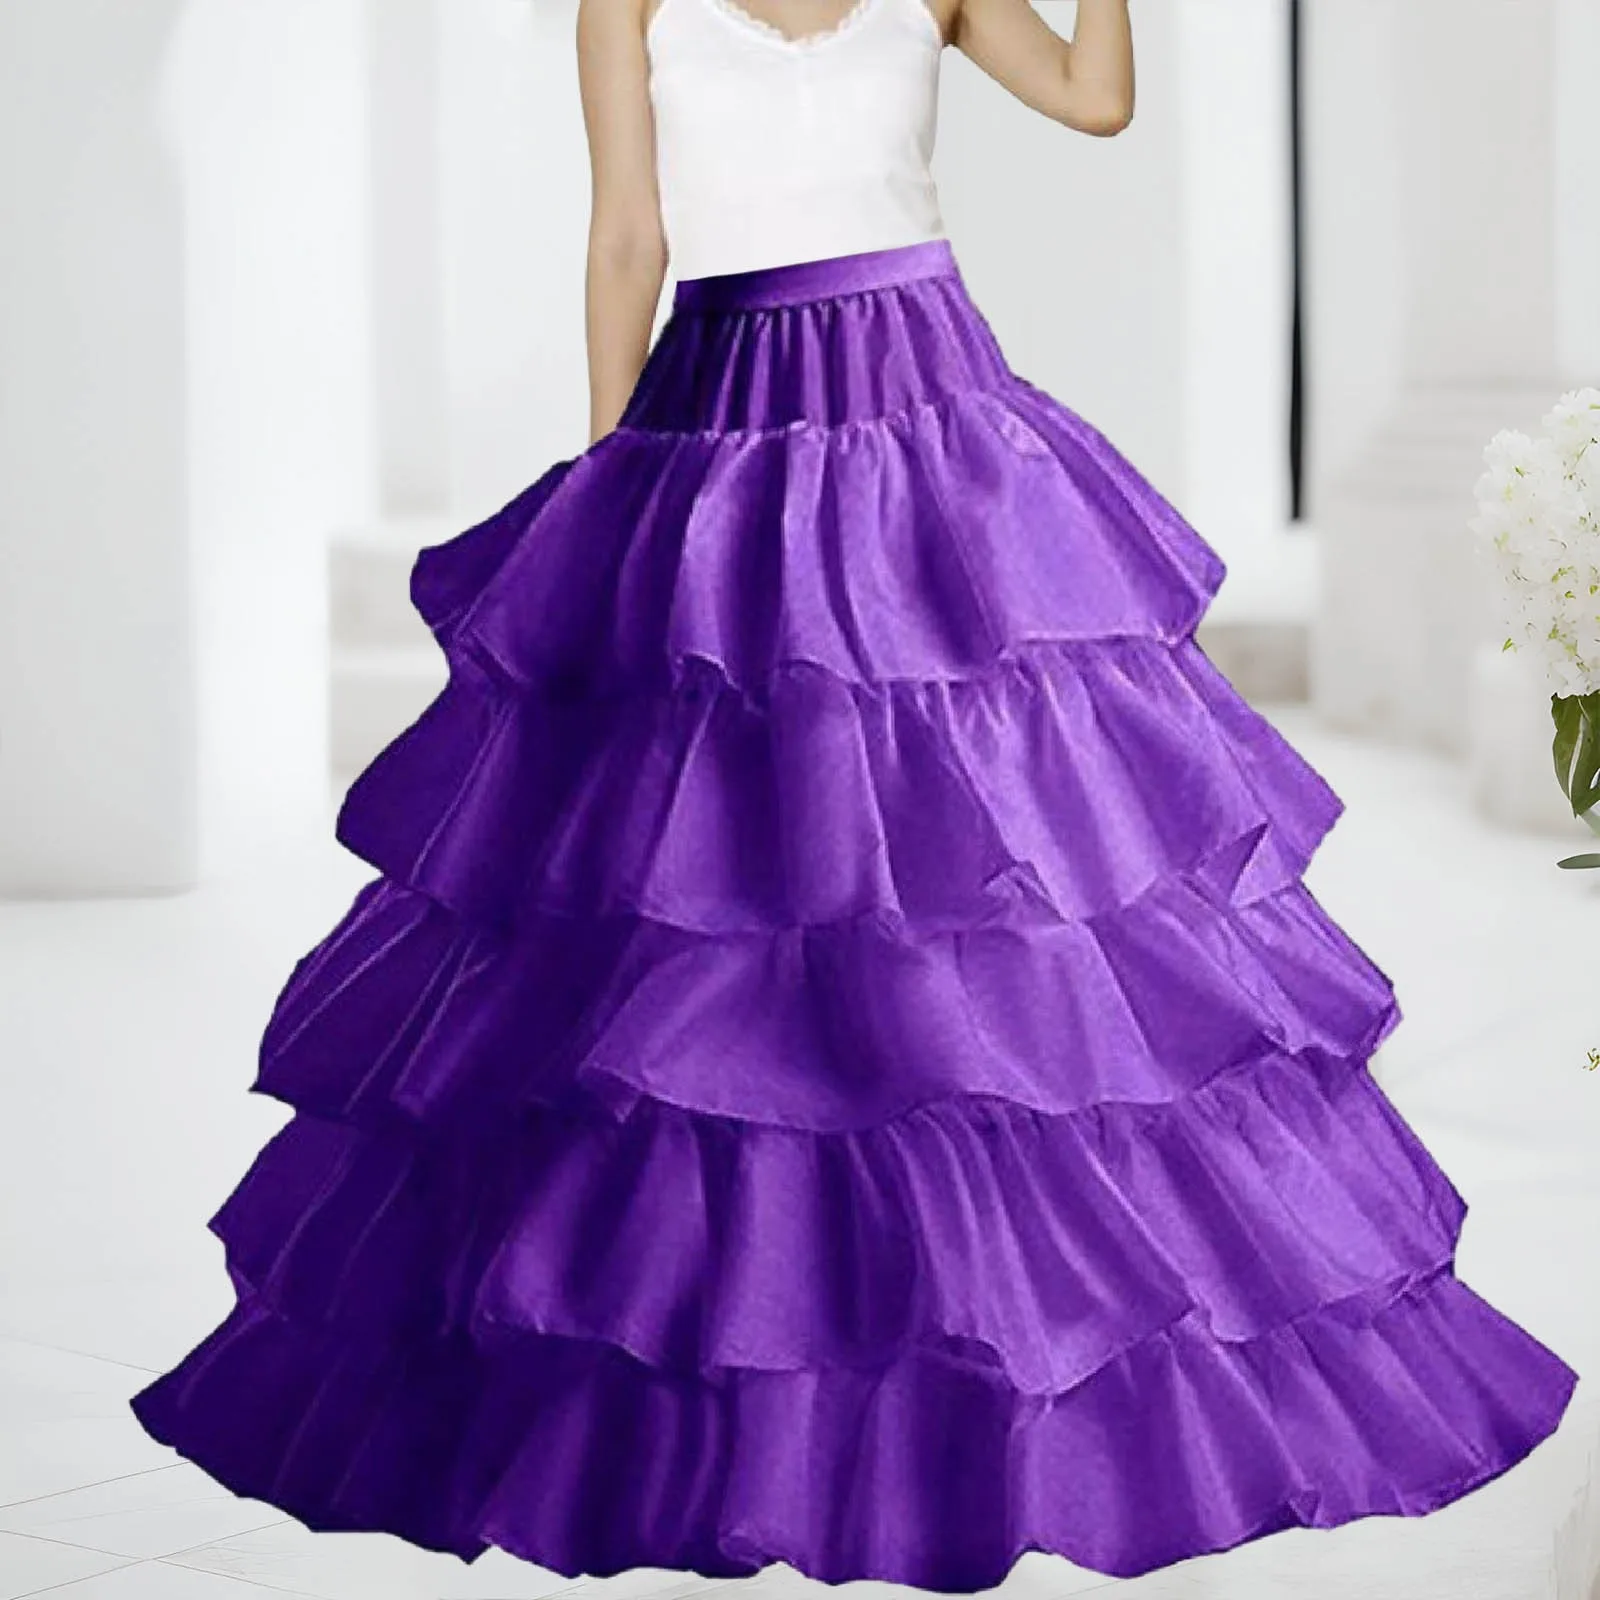 

Women's A Line Petticoats Solid Color Floor Length Skirts High Waist Five Layer Lotus Leaf Skirt Carnival Festival Party Costume